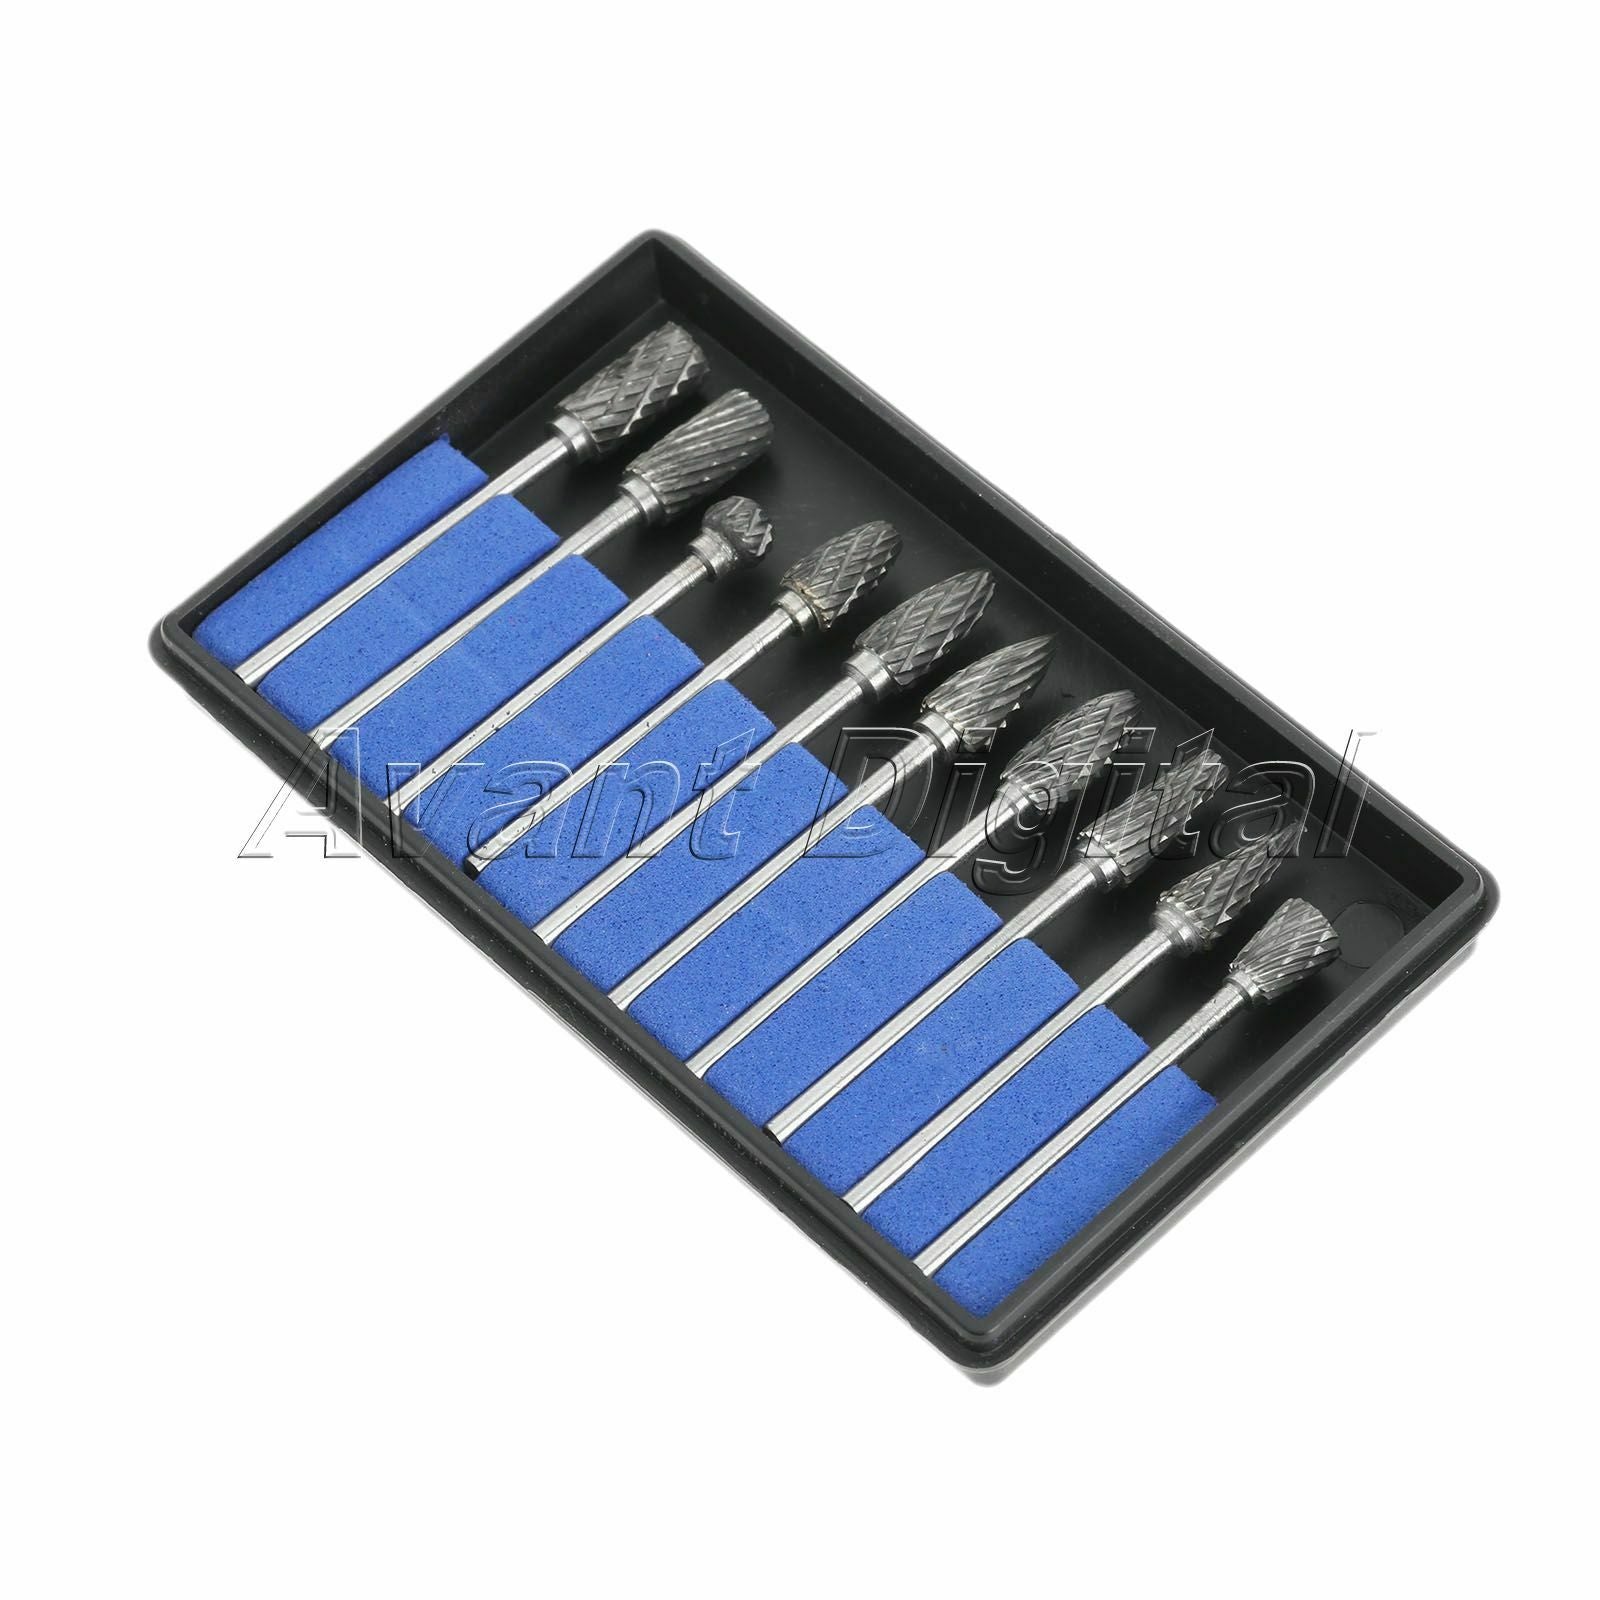 10X Polisher Carbide Burrs Kits Die Grinder Carving Bit for Power Rotary Tools